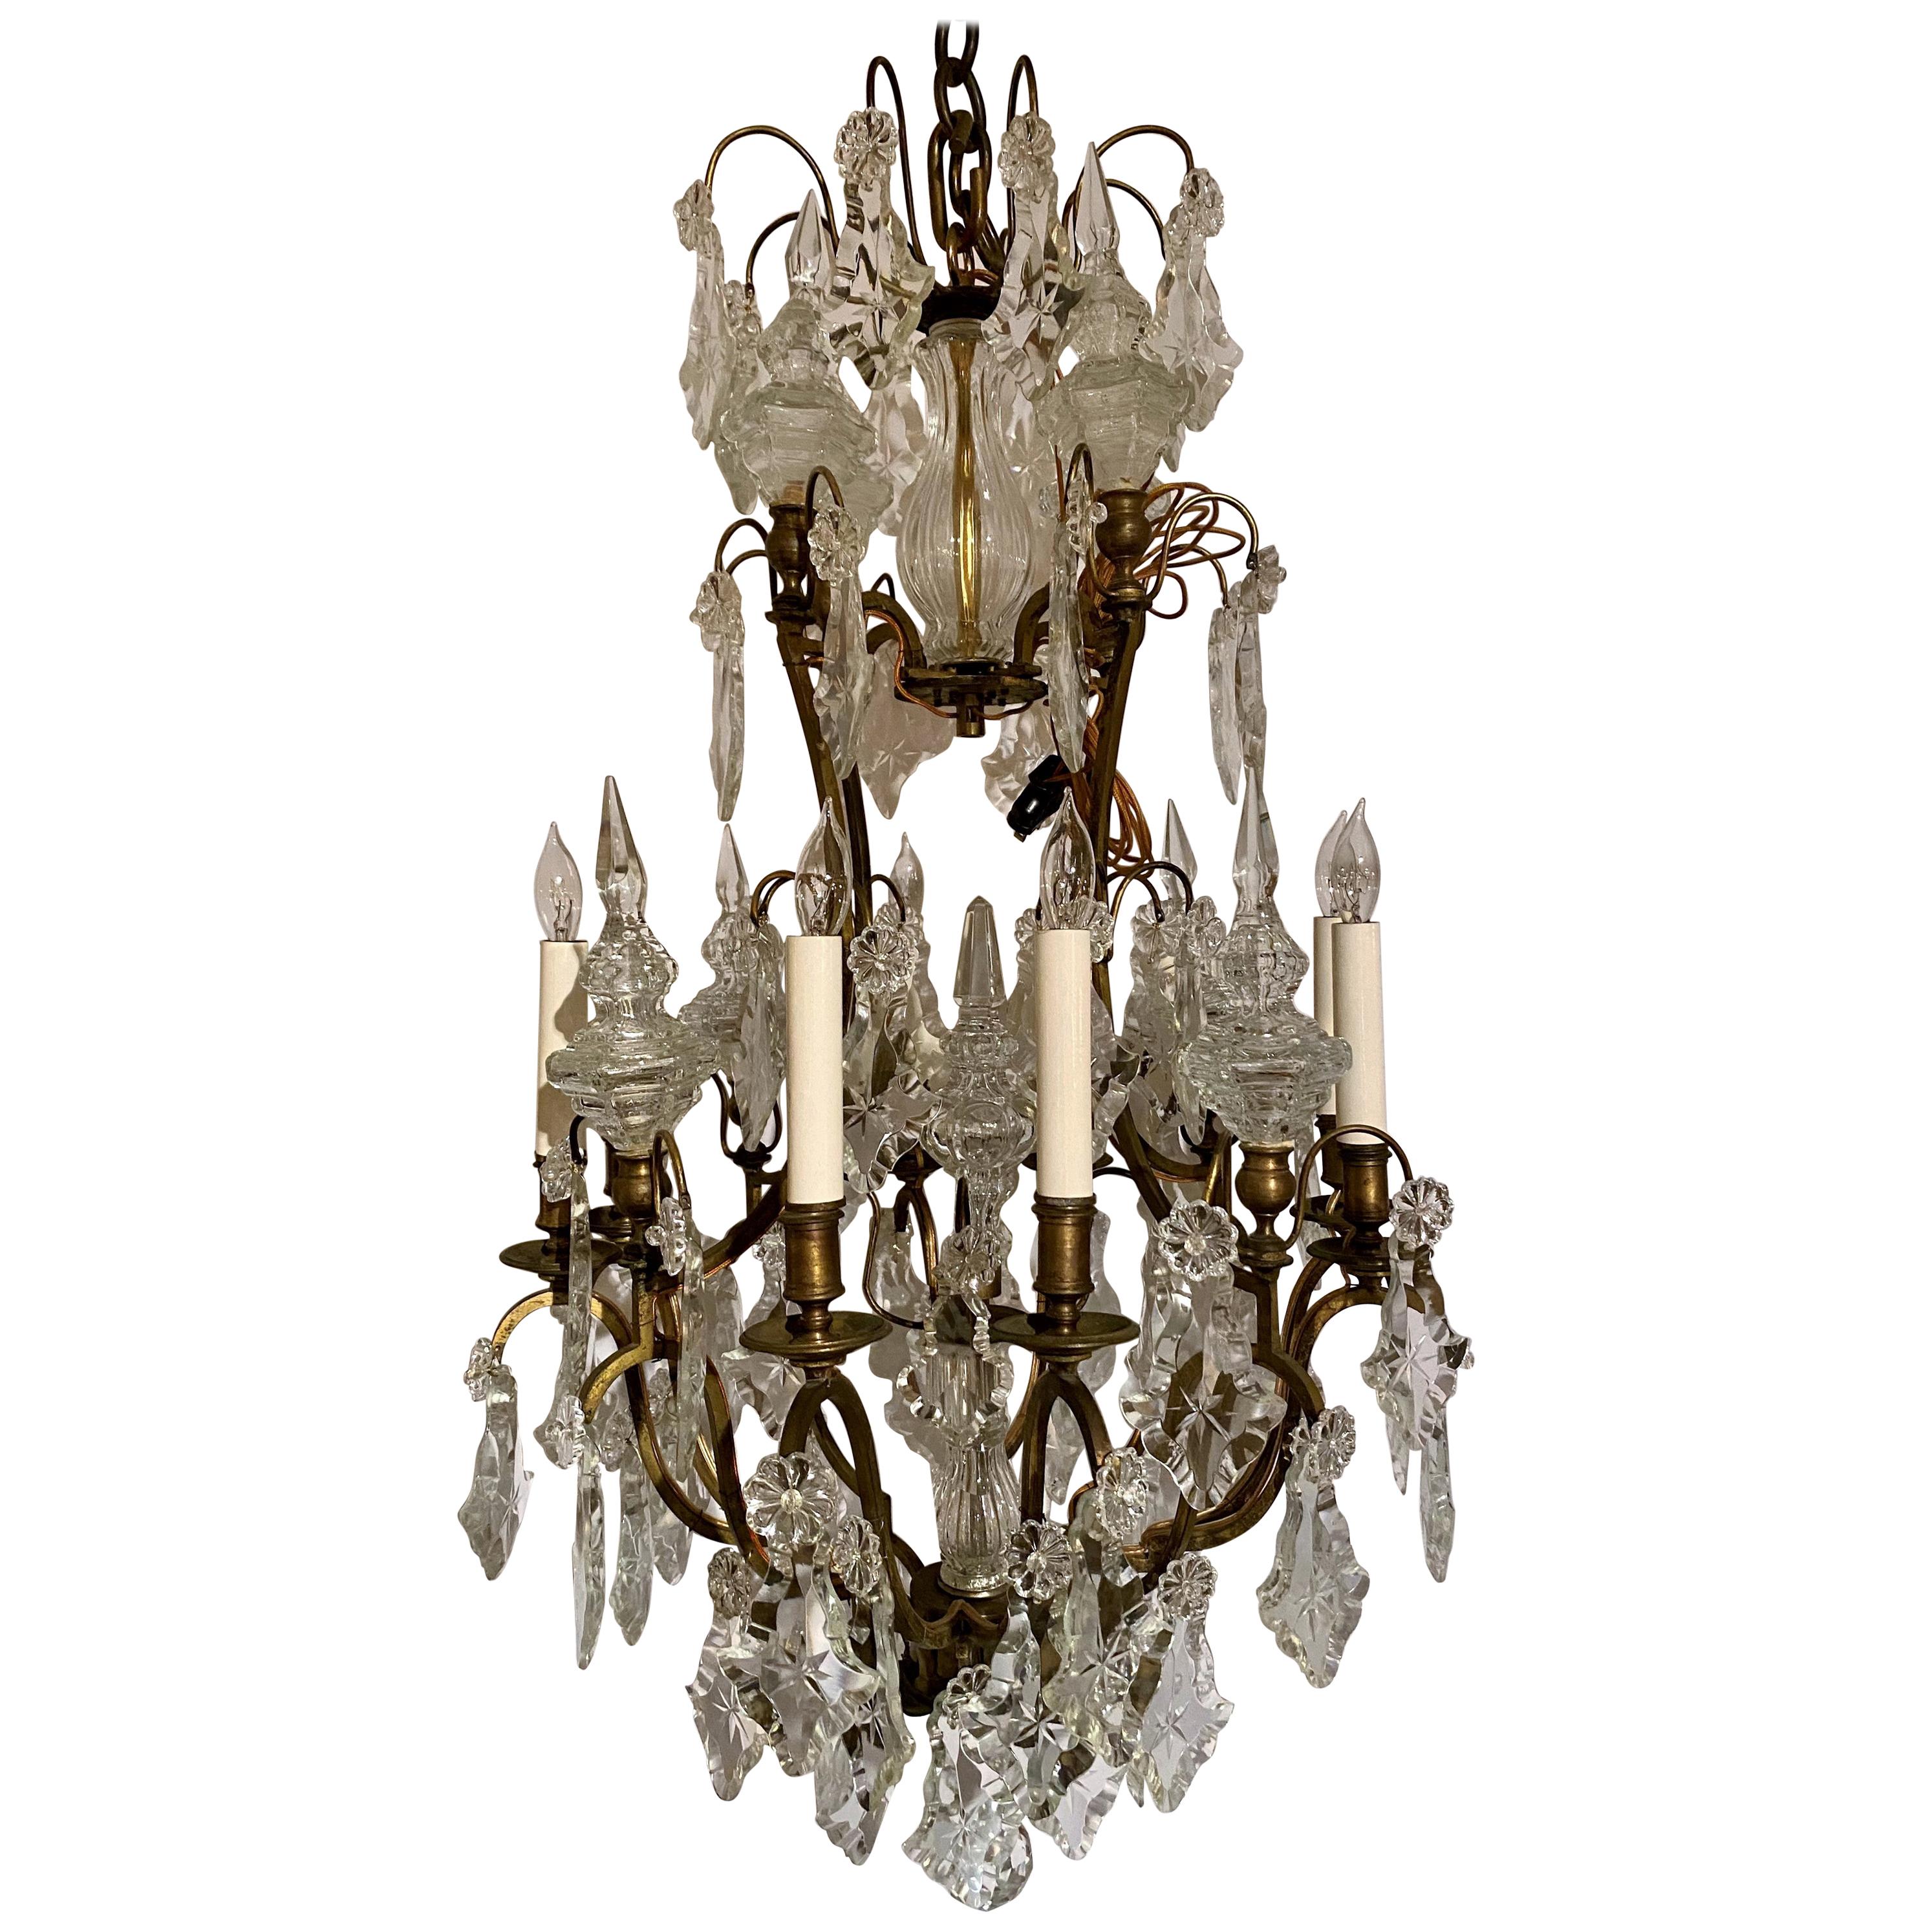 Antique French Original Baccarat Crystal and Bronze Chandelier, circa 1880 For Sale